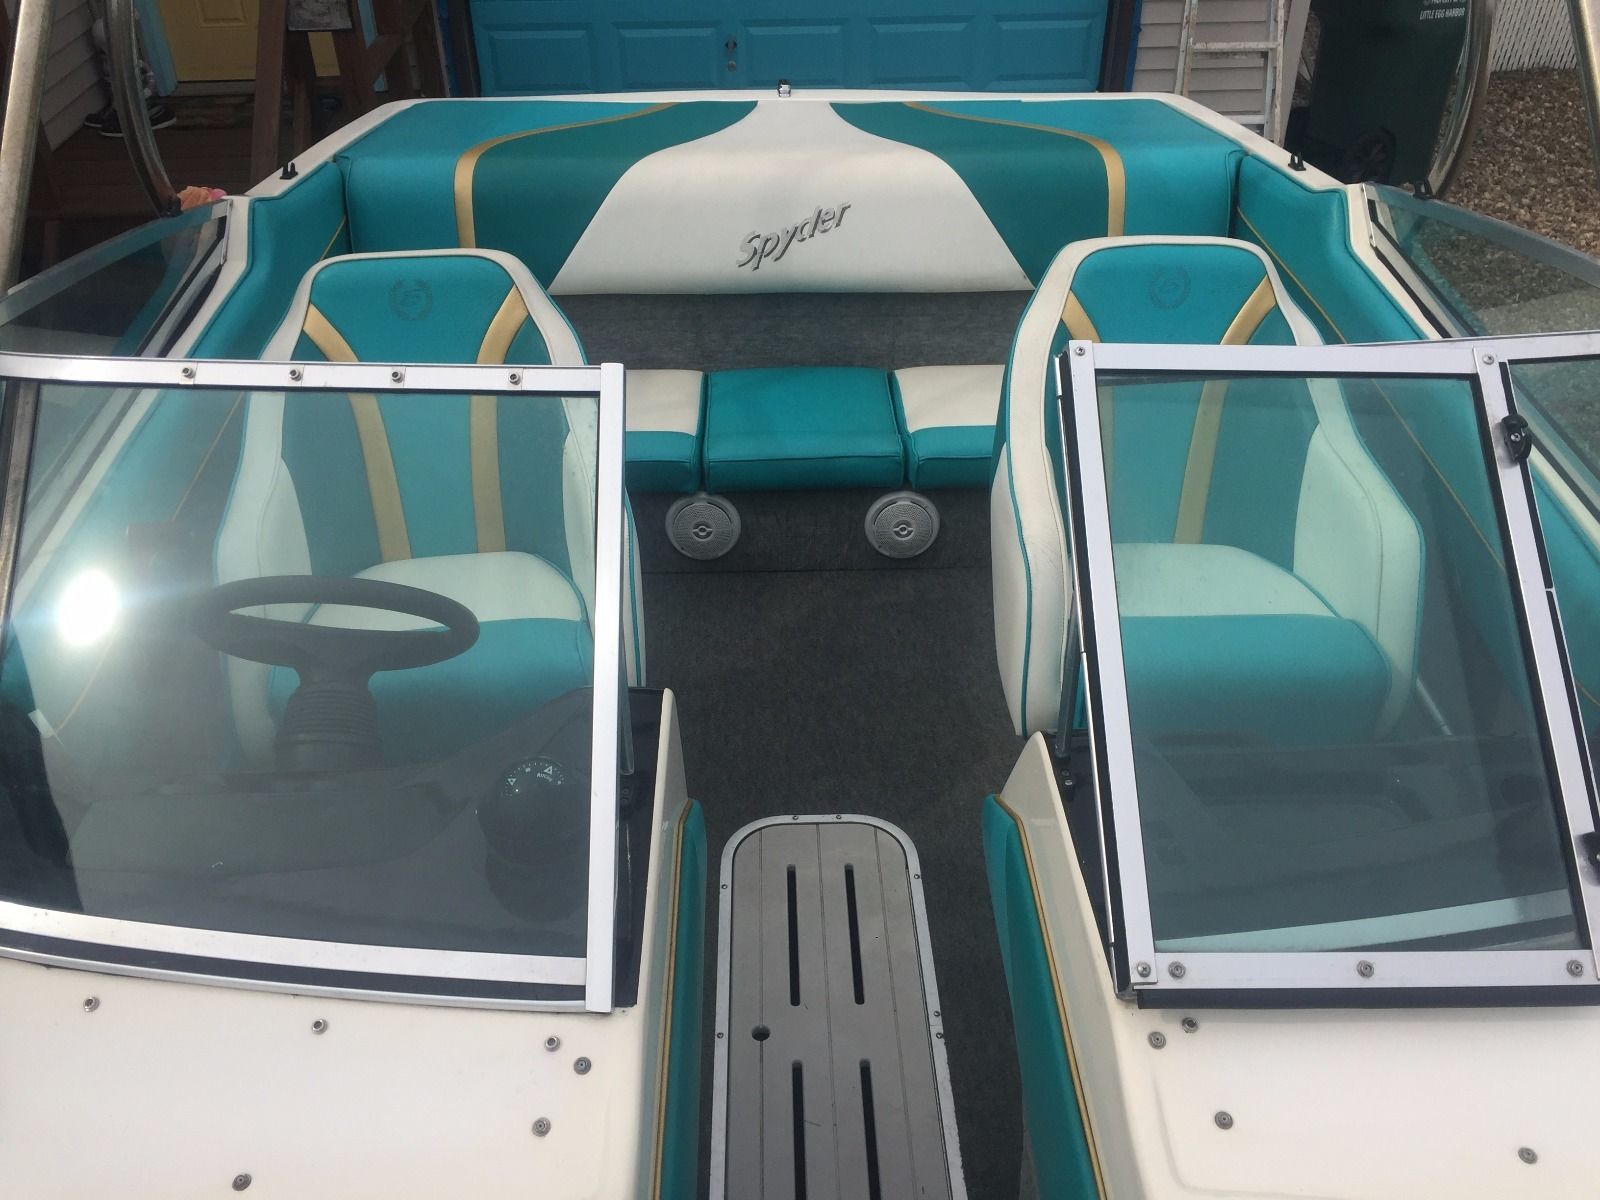 Seaswirl 208 Spyder 1993 for sale for $6,500 - Boats-from-USA.com